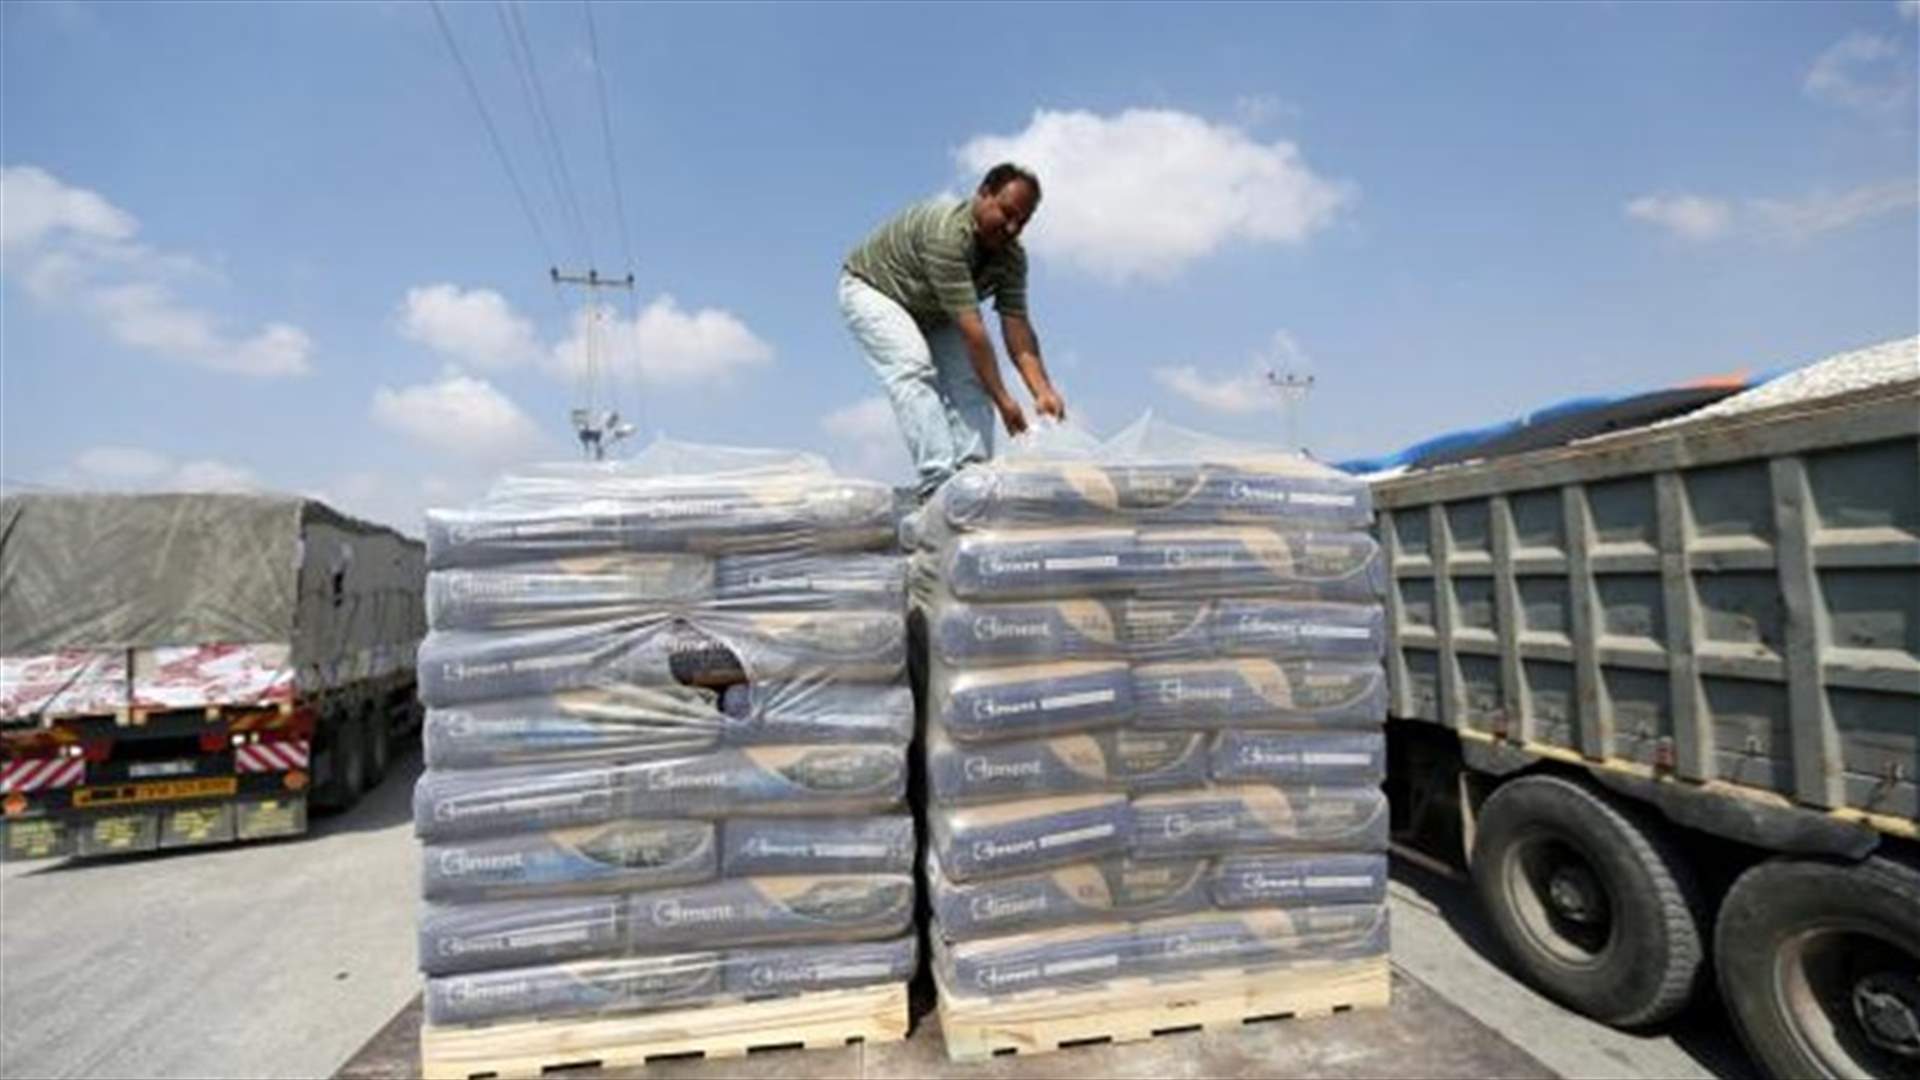 Israel resumes cement shipments for private Gaza reconstruction after 45-day break